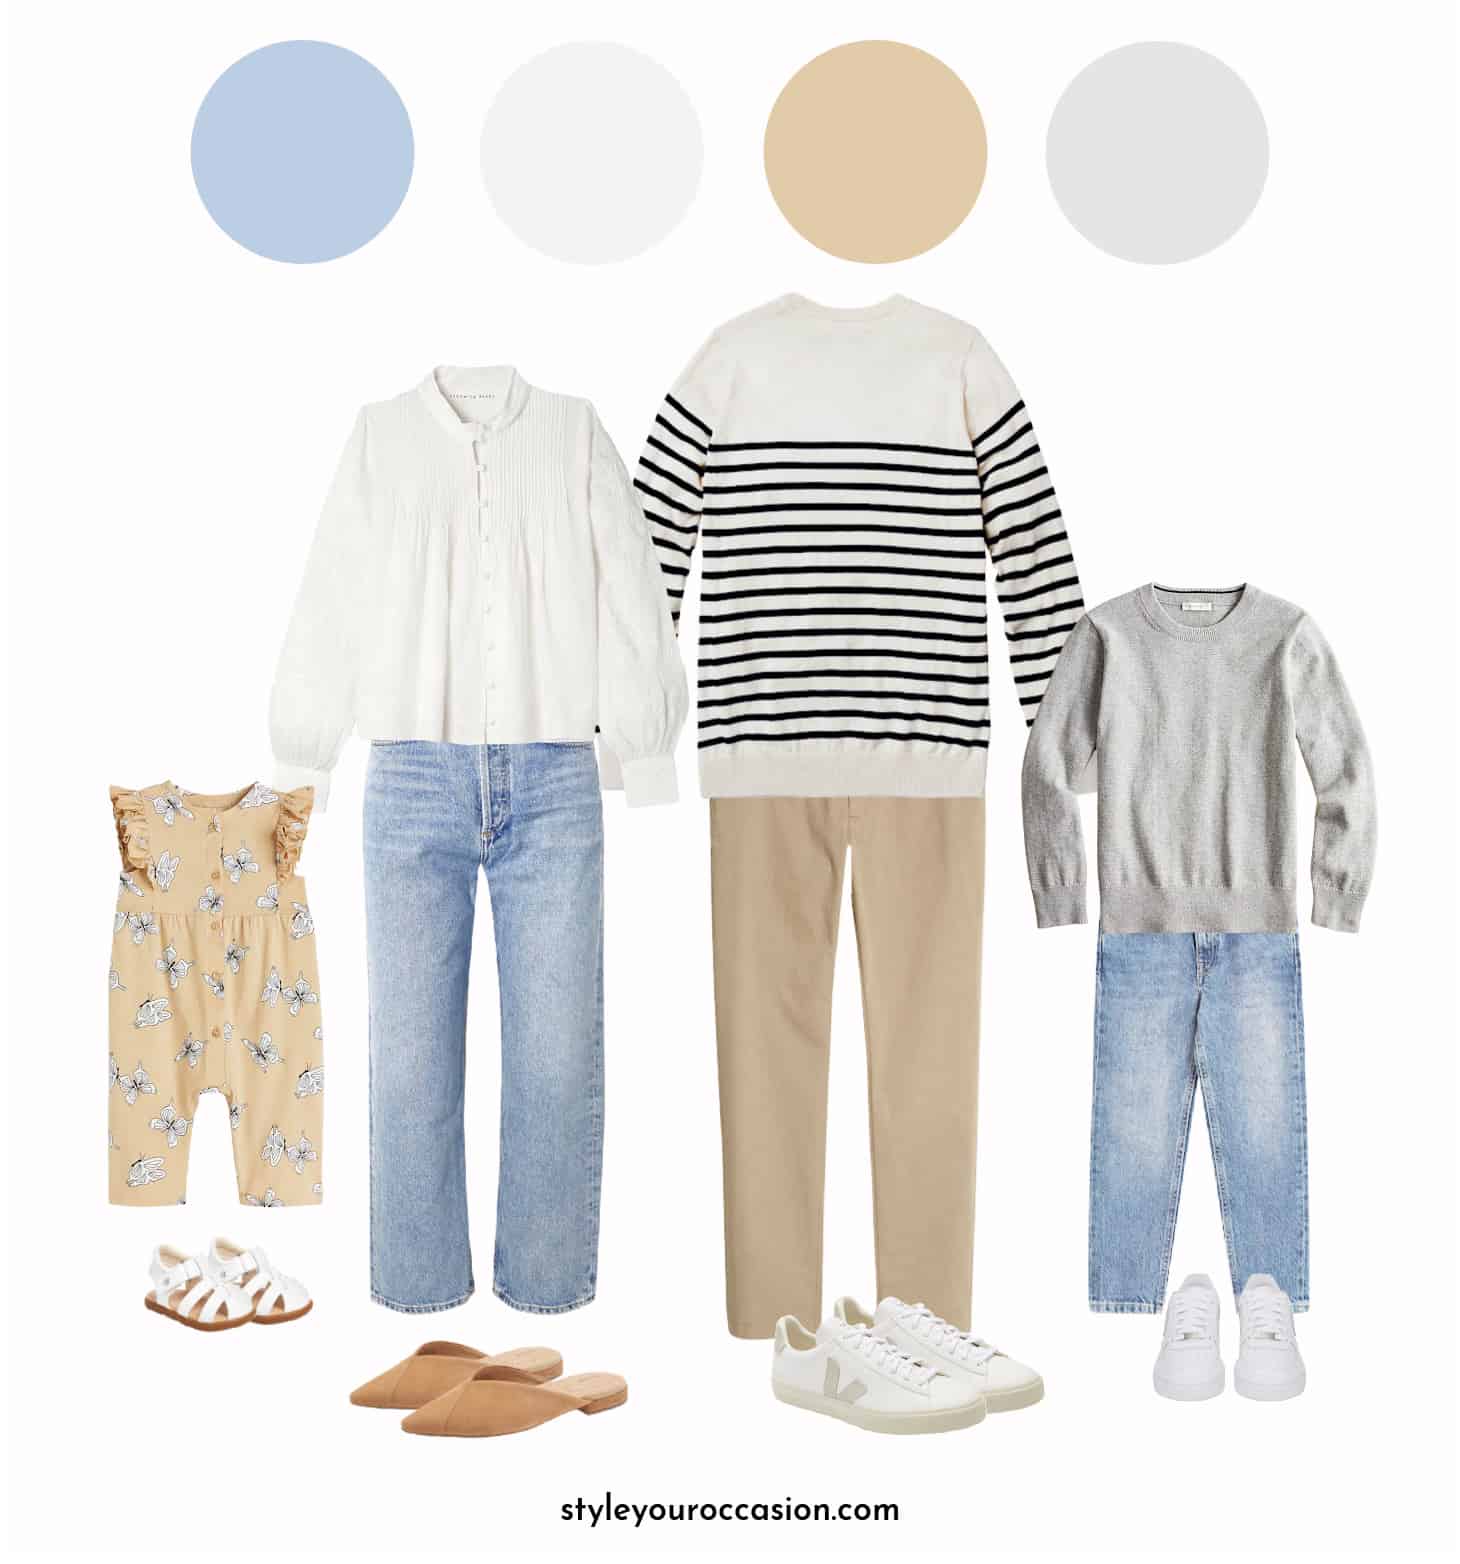 mood board of a family photo outfit guide with shades of yellow, neutrals, and denim